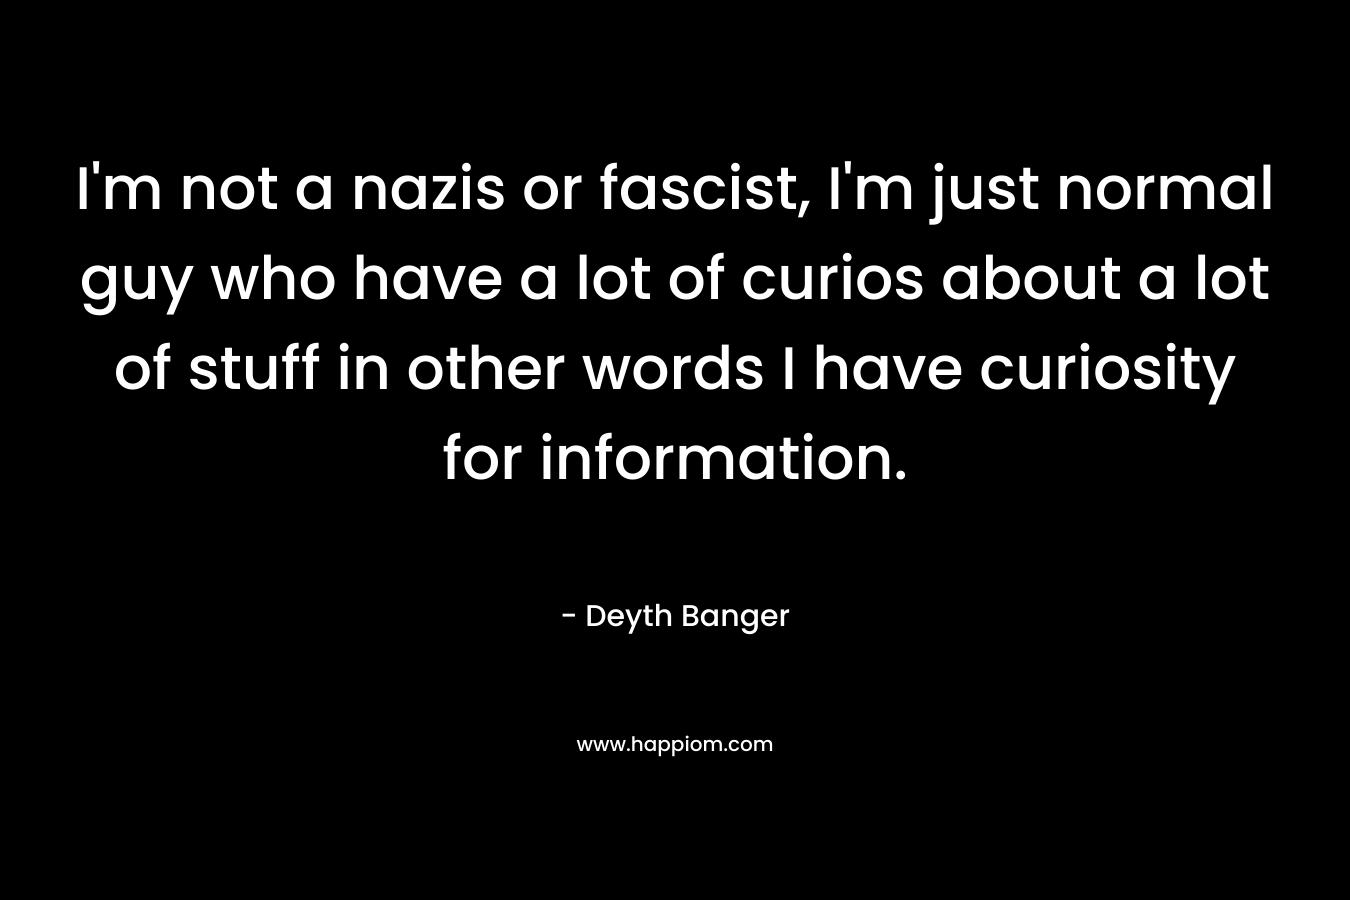 I’m not a nazis or fascist, I’m just normal guy who have a lot of curios about a lot of stuff in other words I have curiosity for information. – Deyth Banger